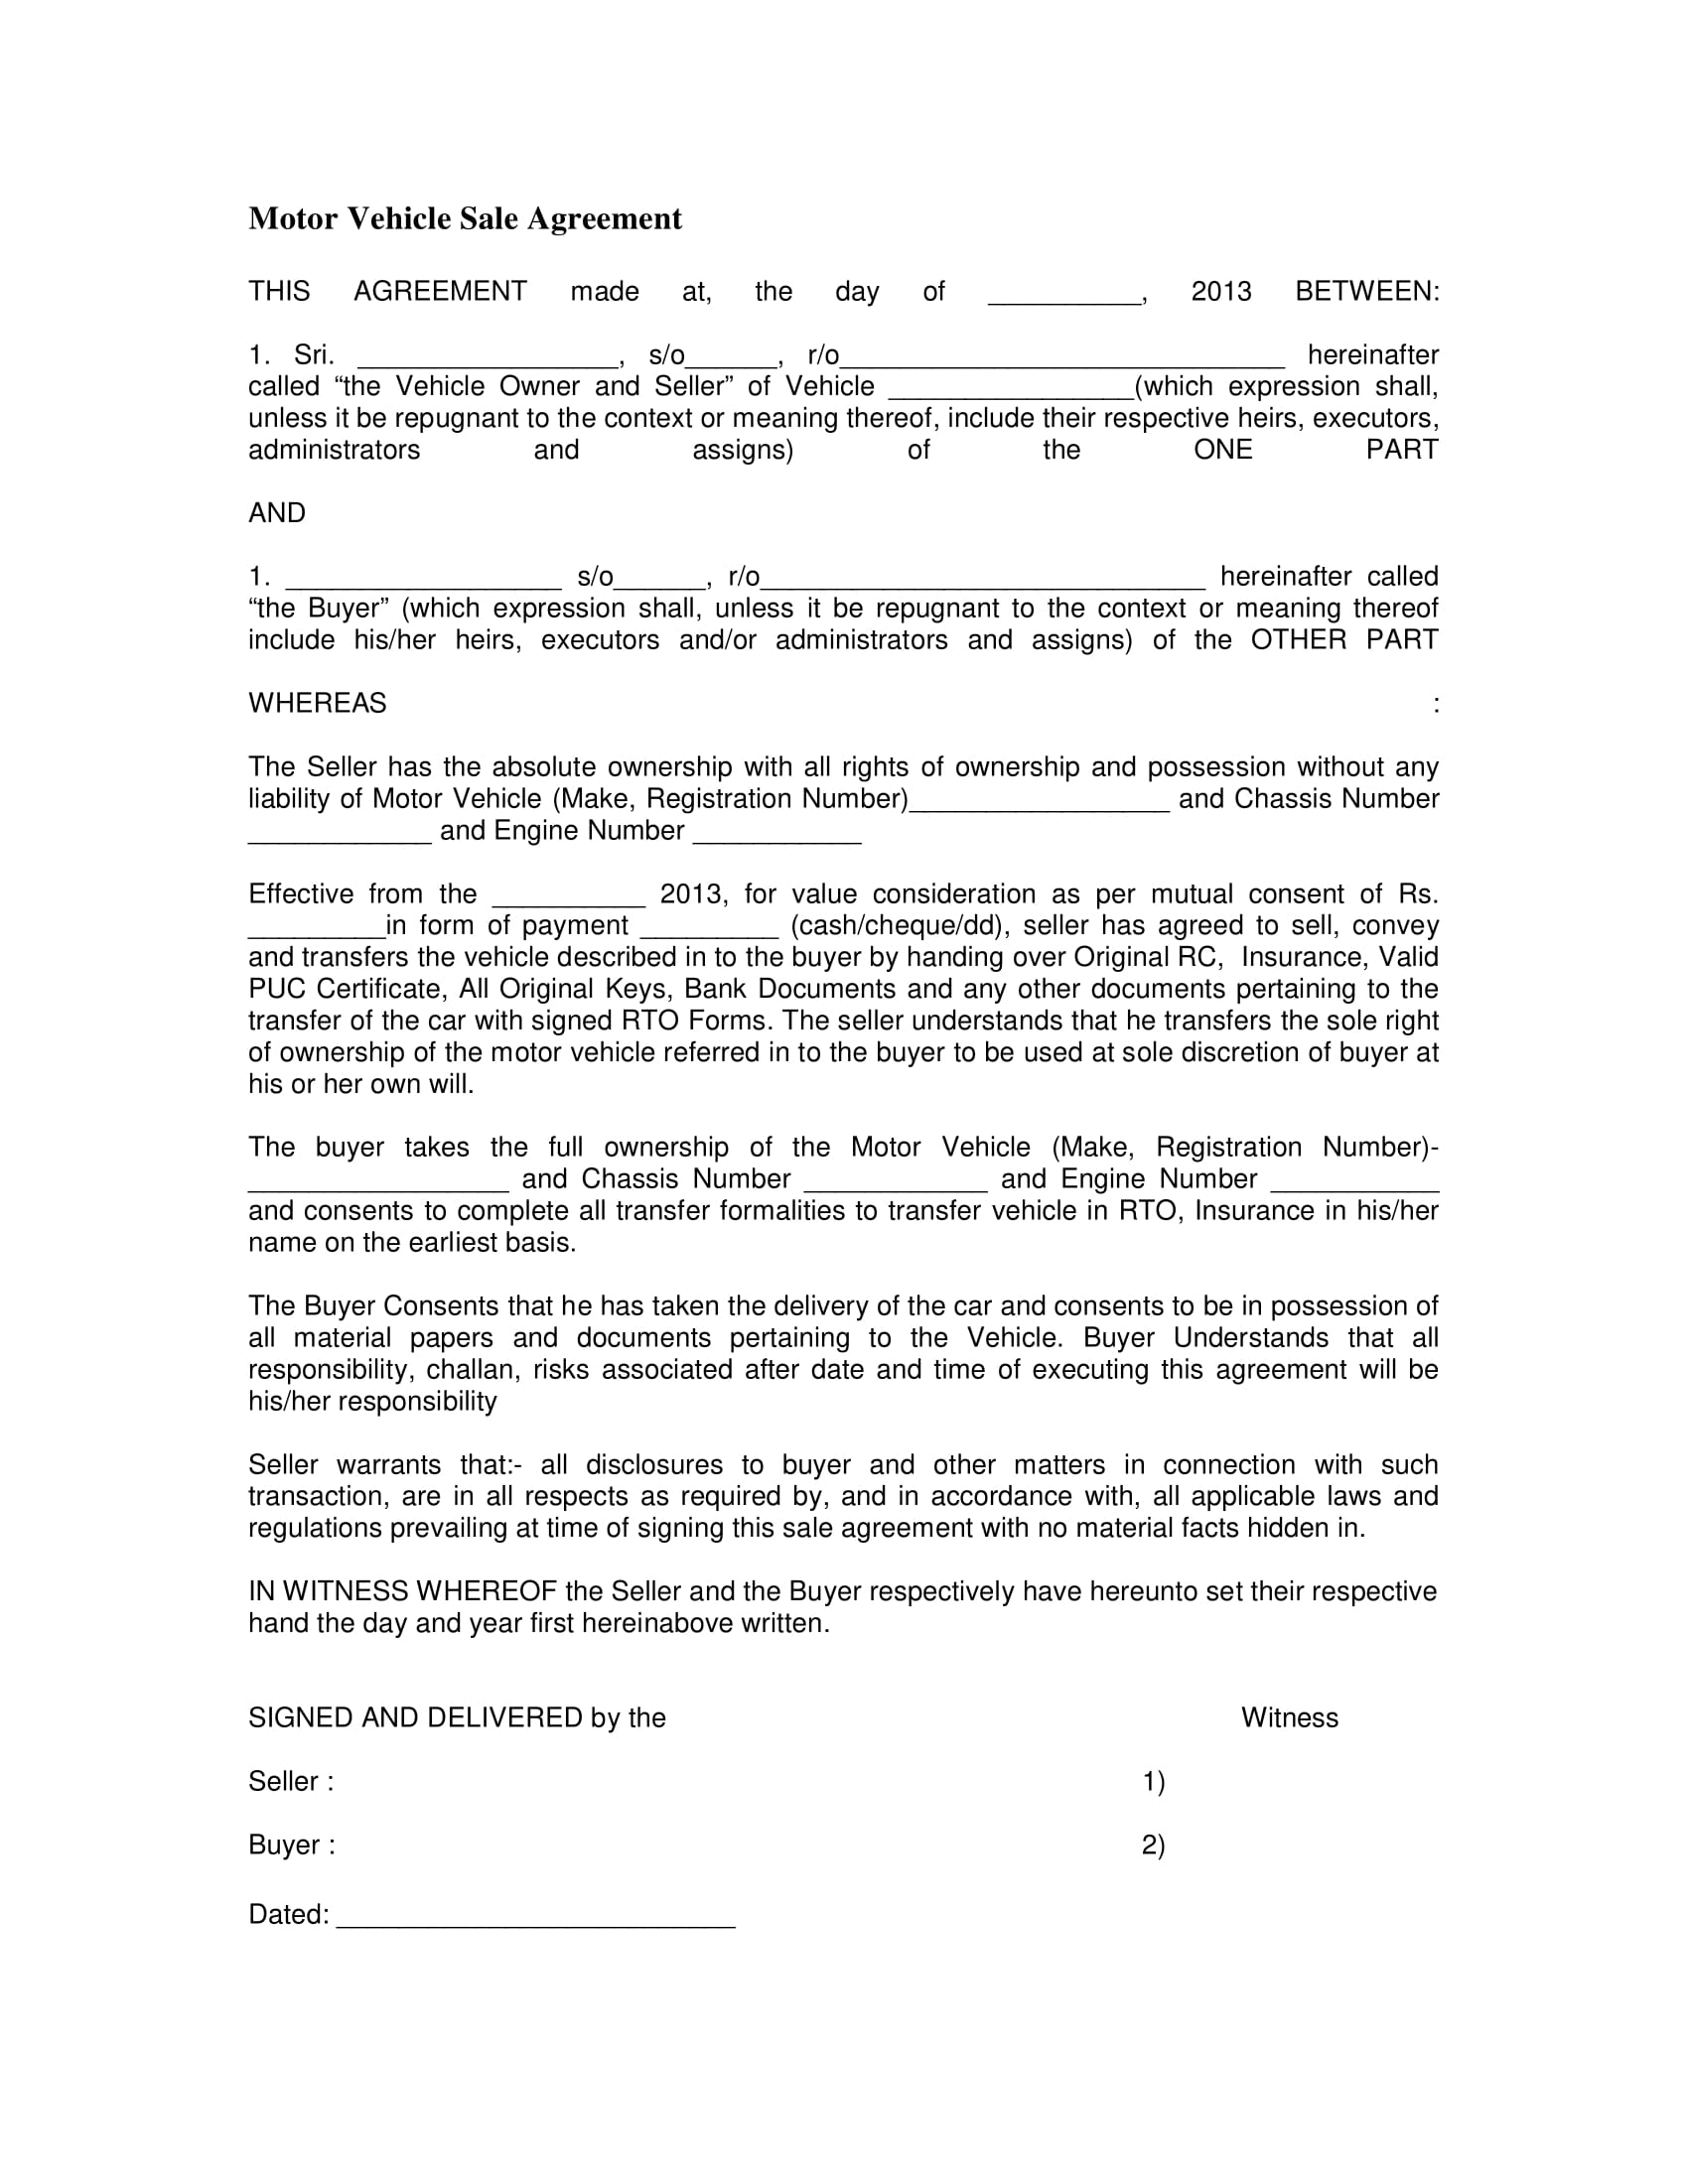 motor vehicle sale agreement contract form 1